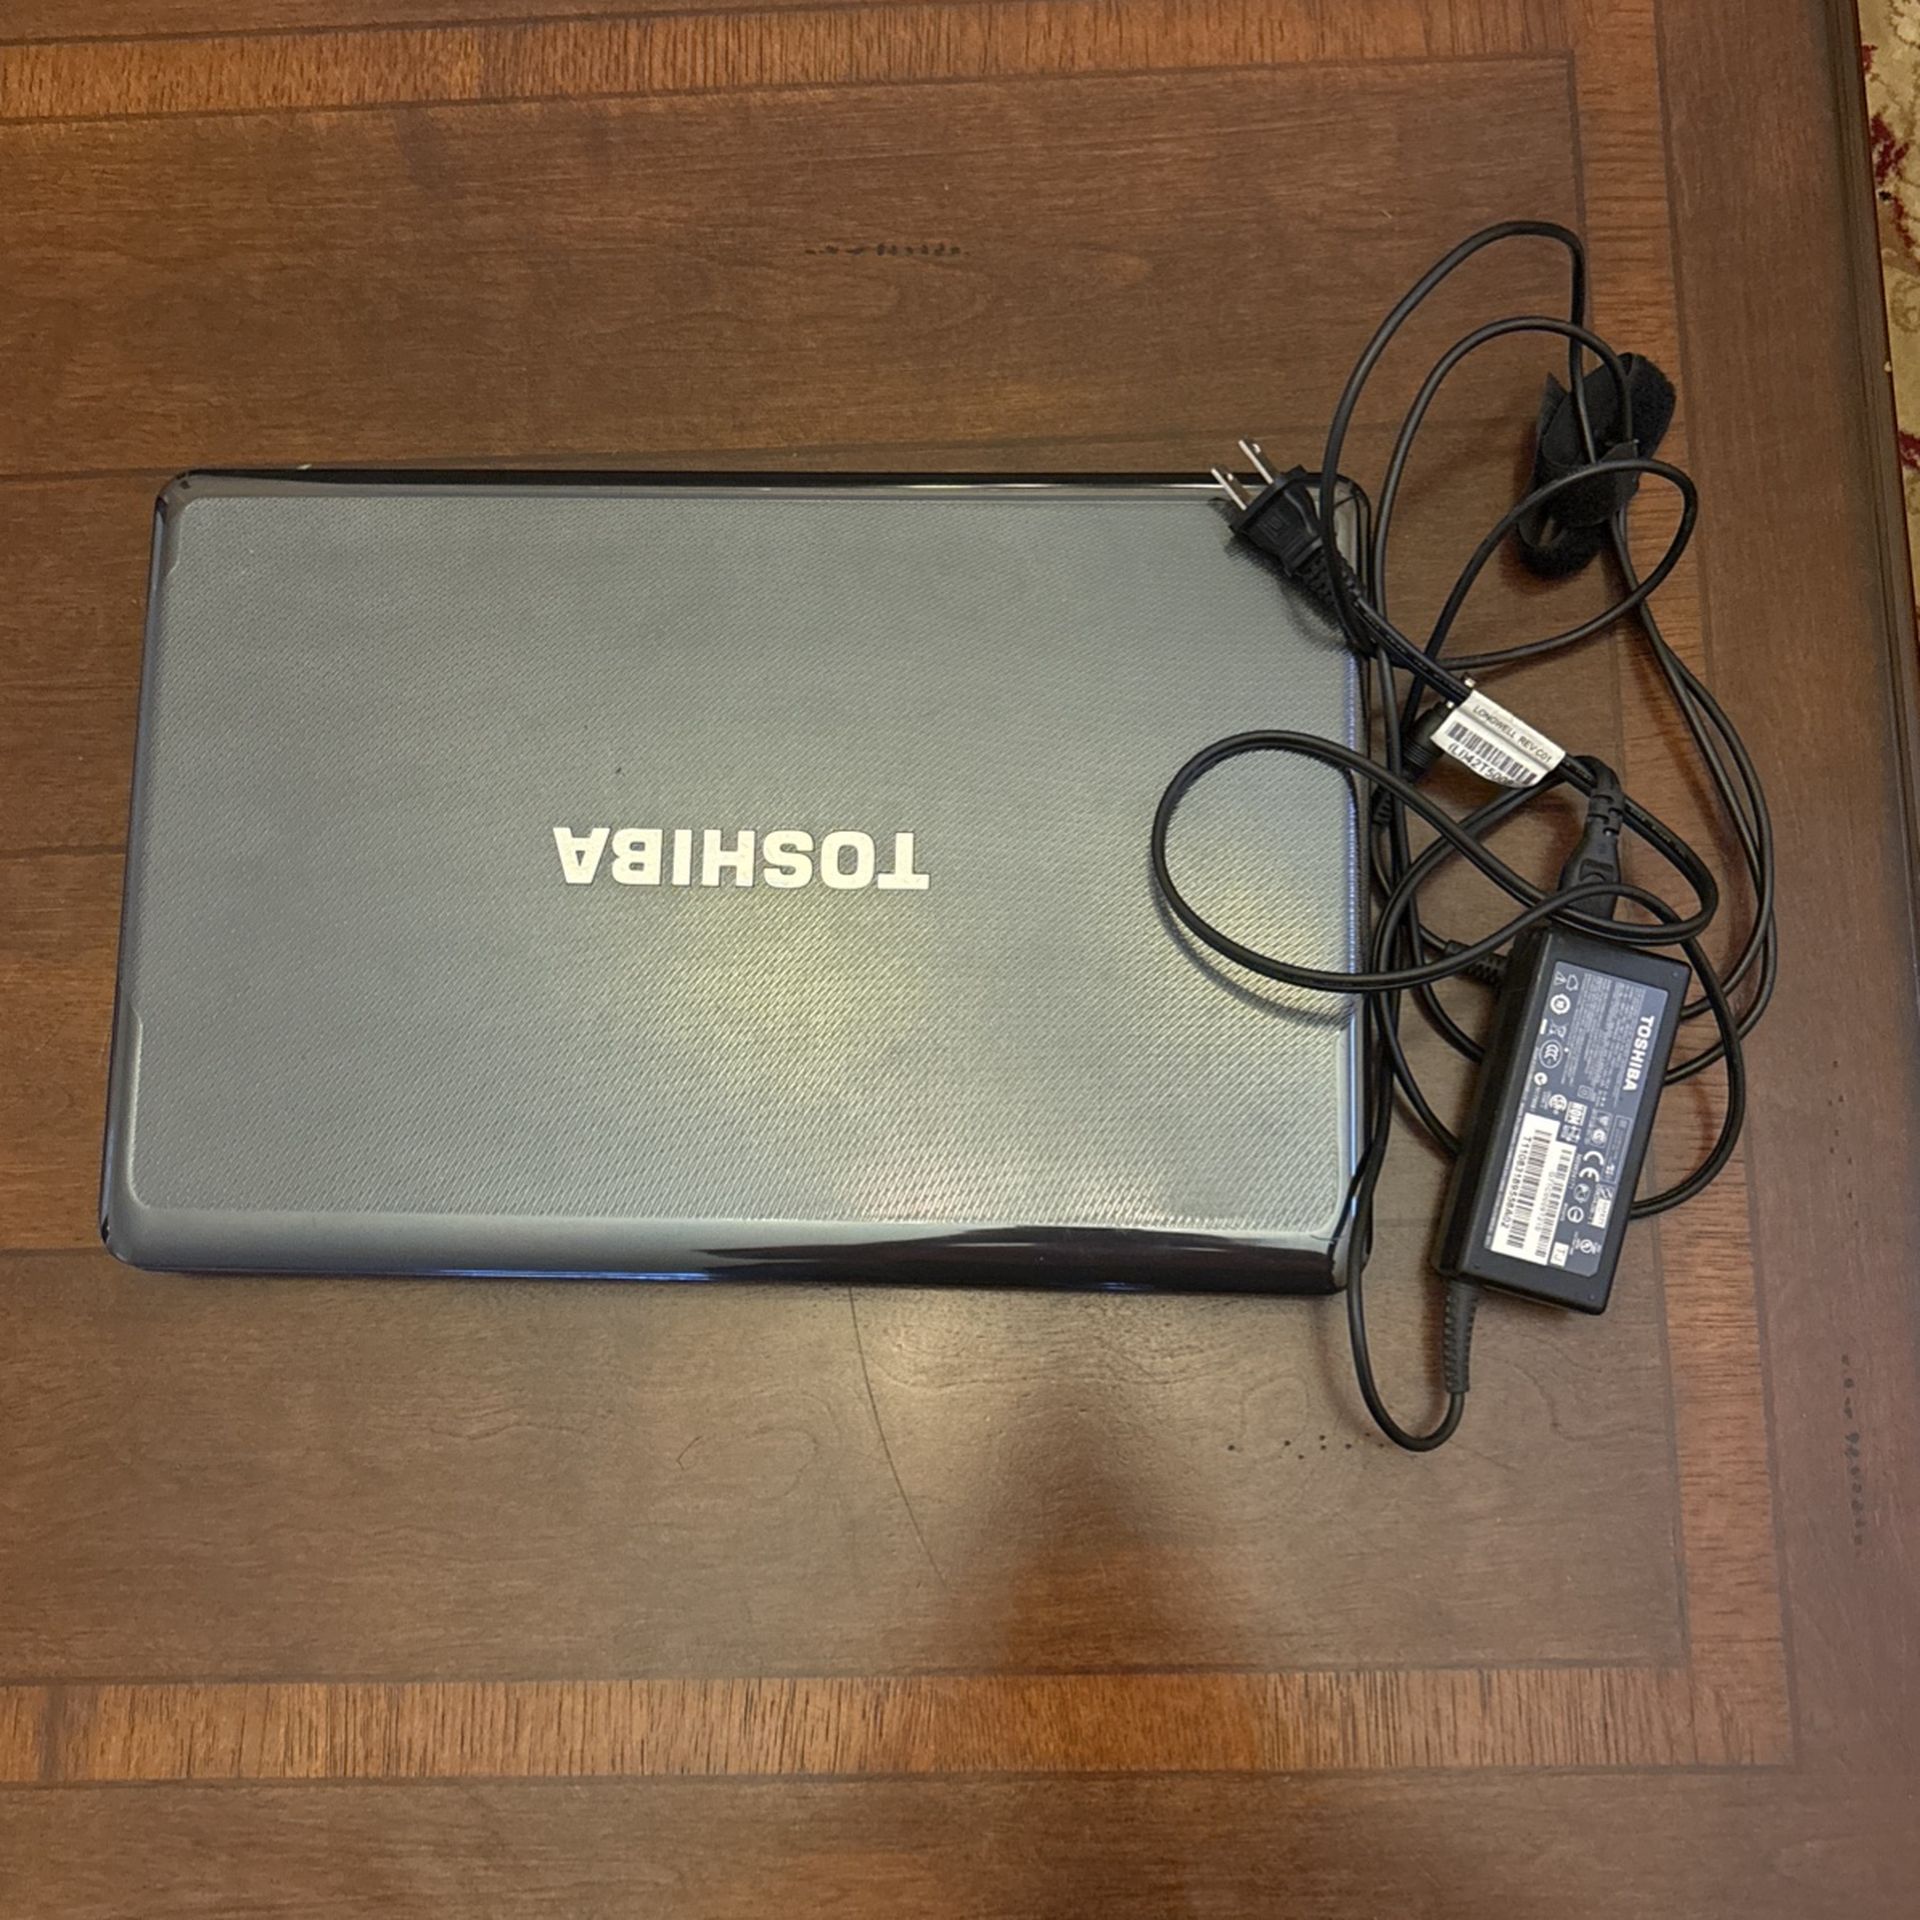 Toshiba Laptop W/ Charger